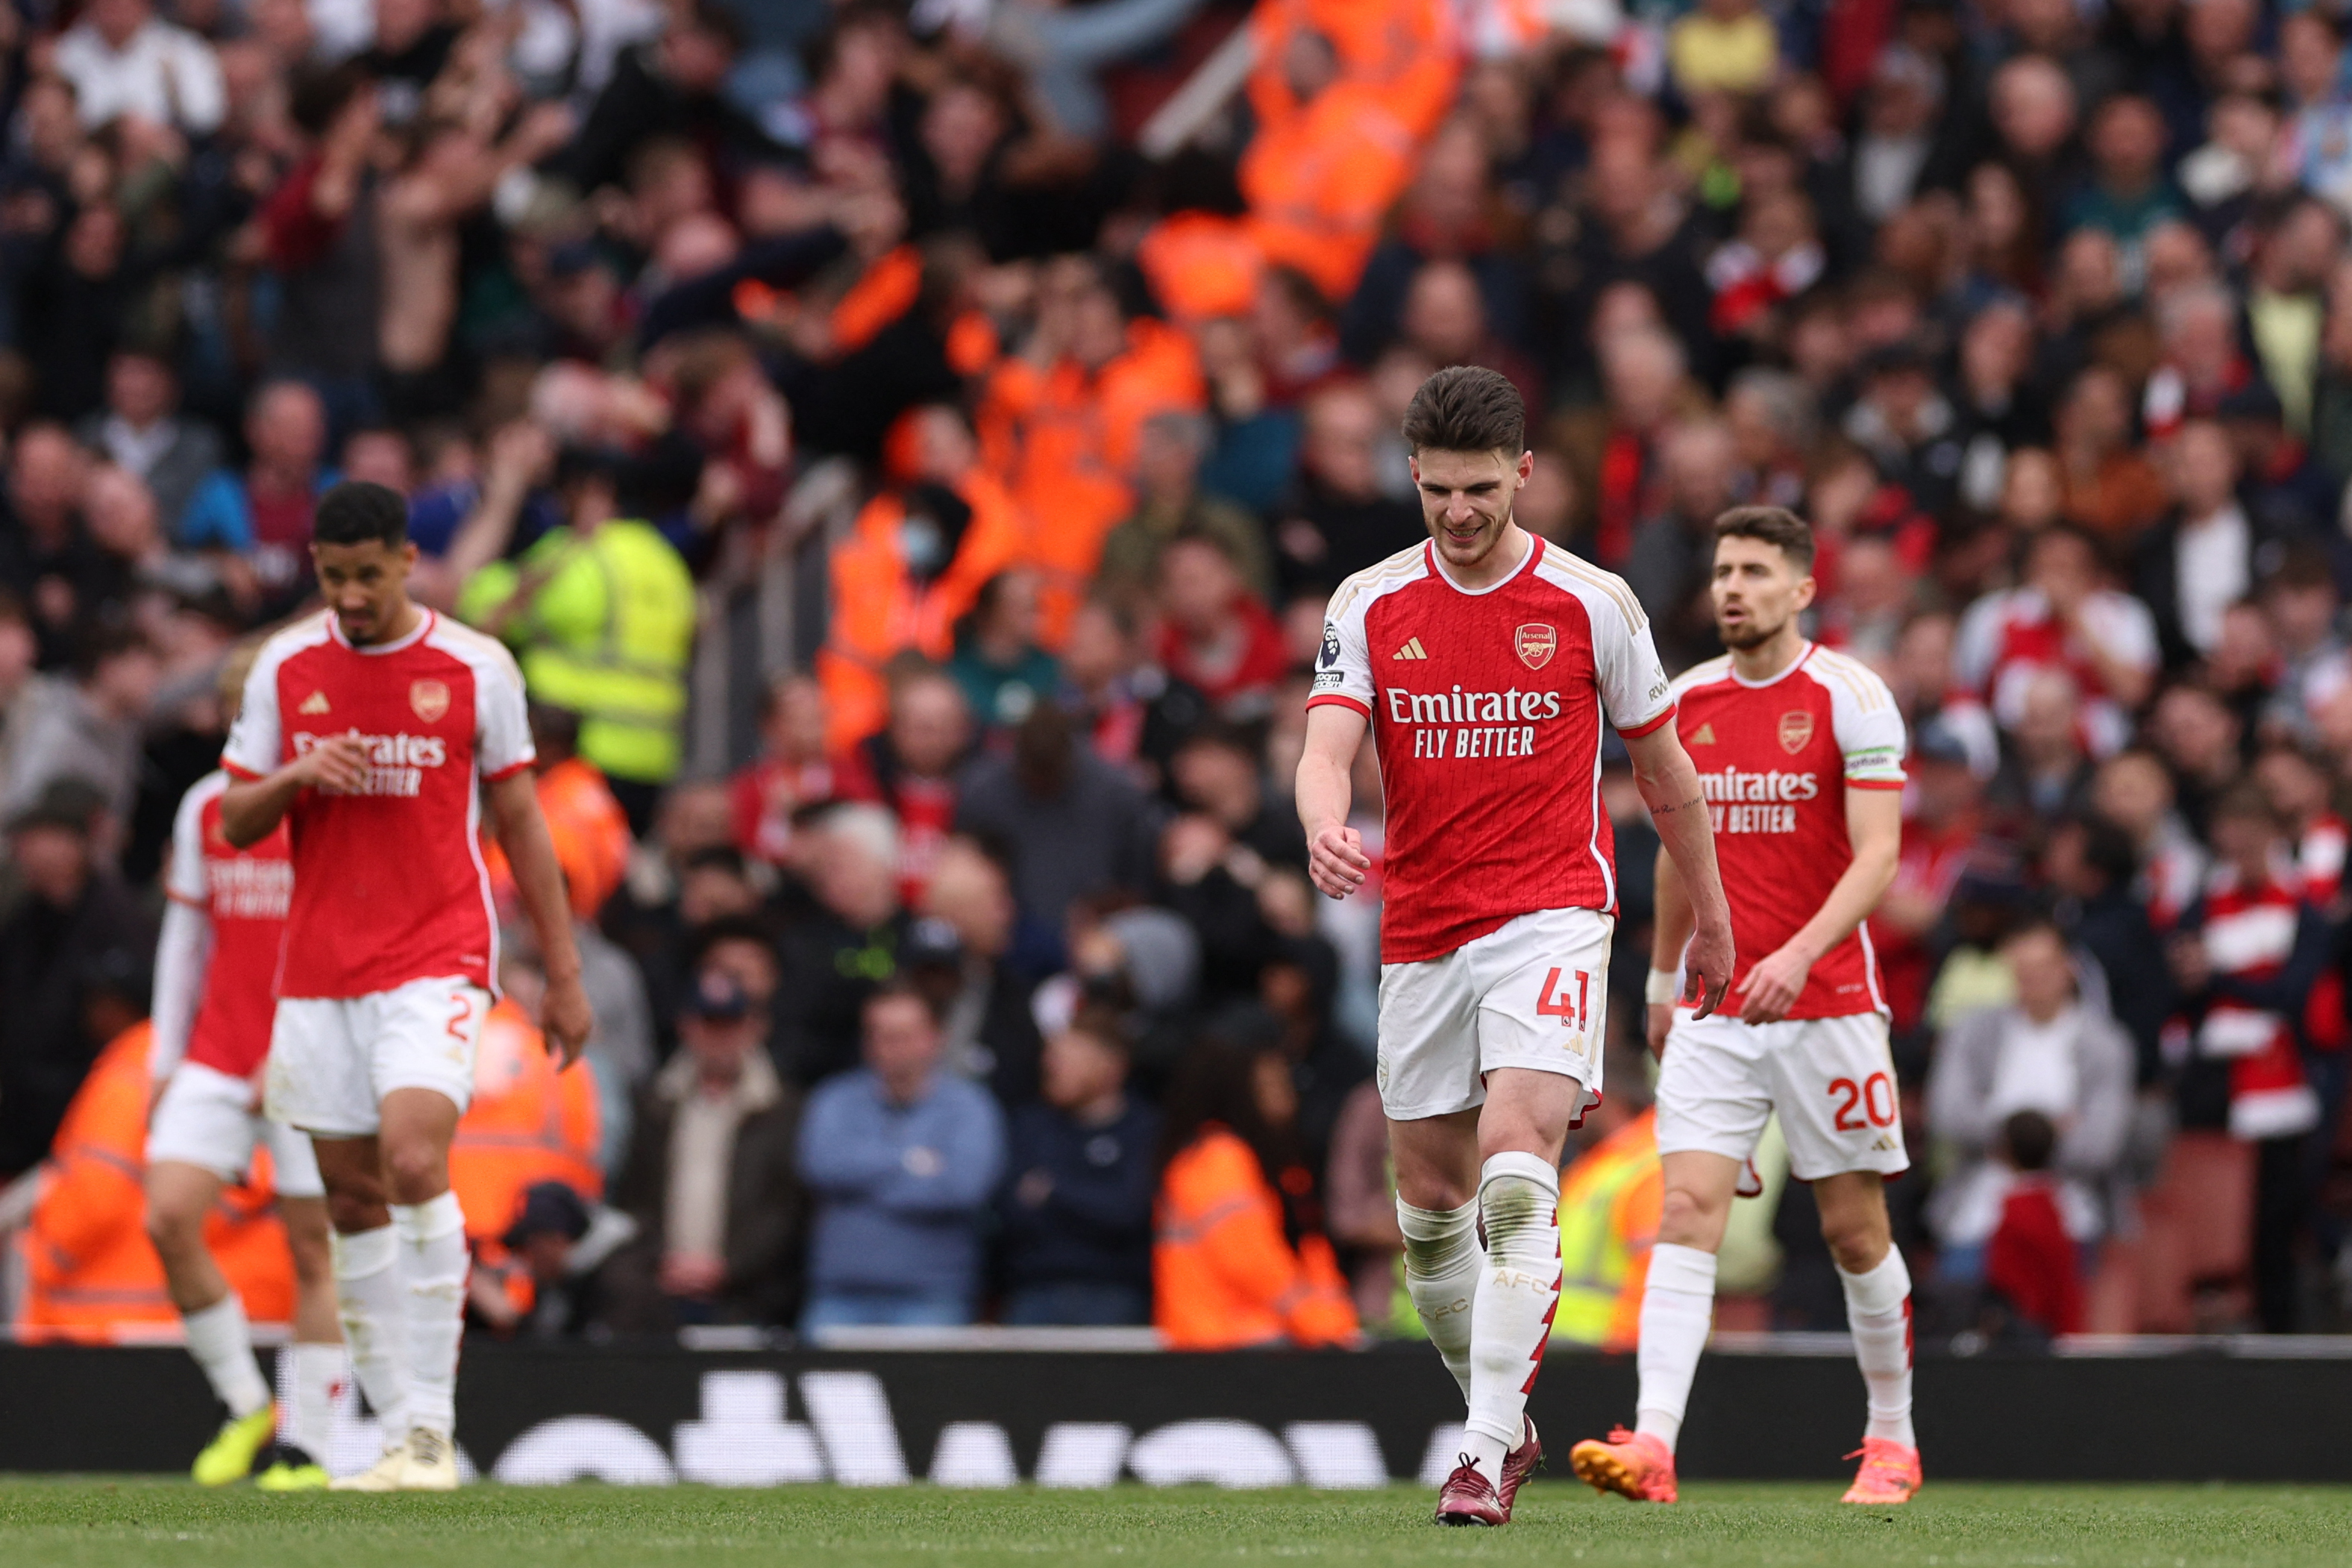 Arsenal have the chance to redeem themselves in the league with back-to-back games